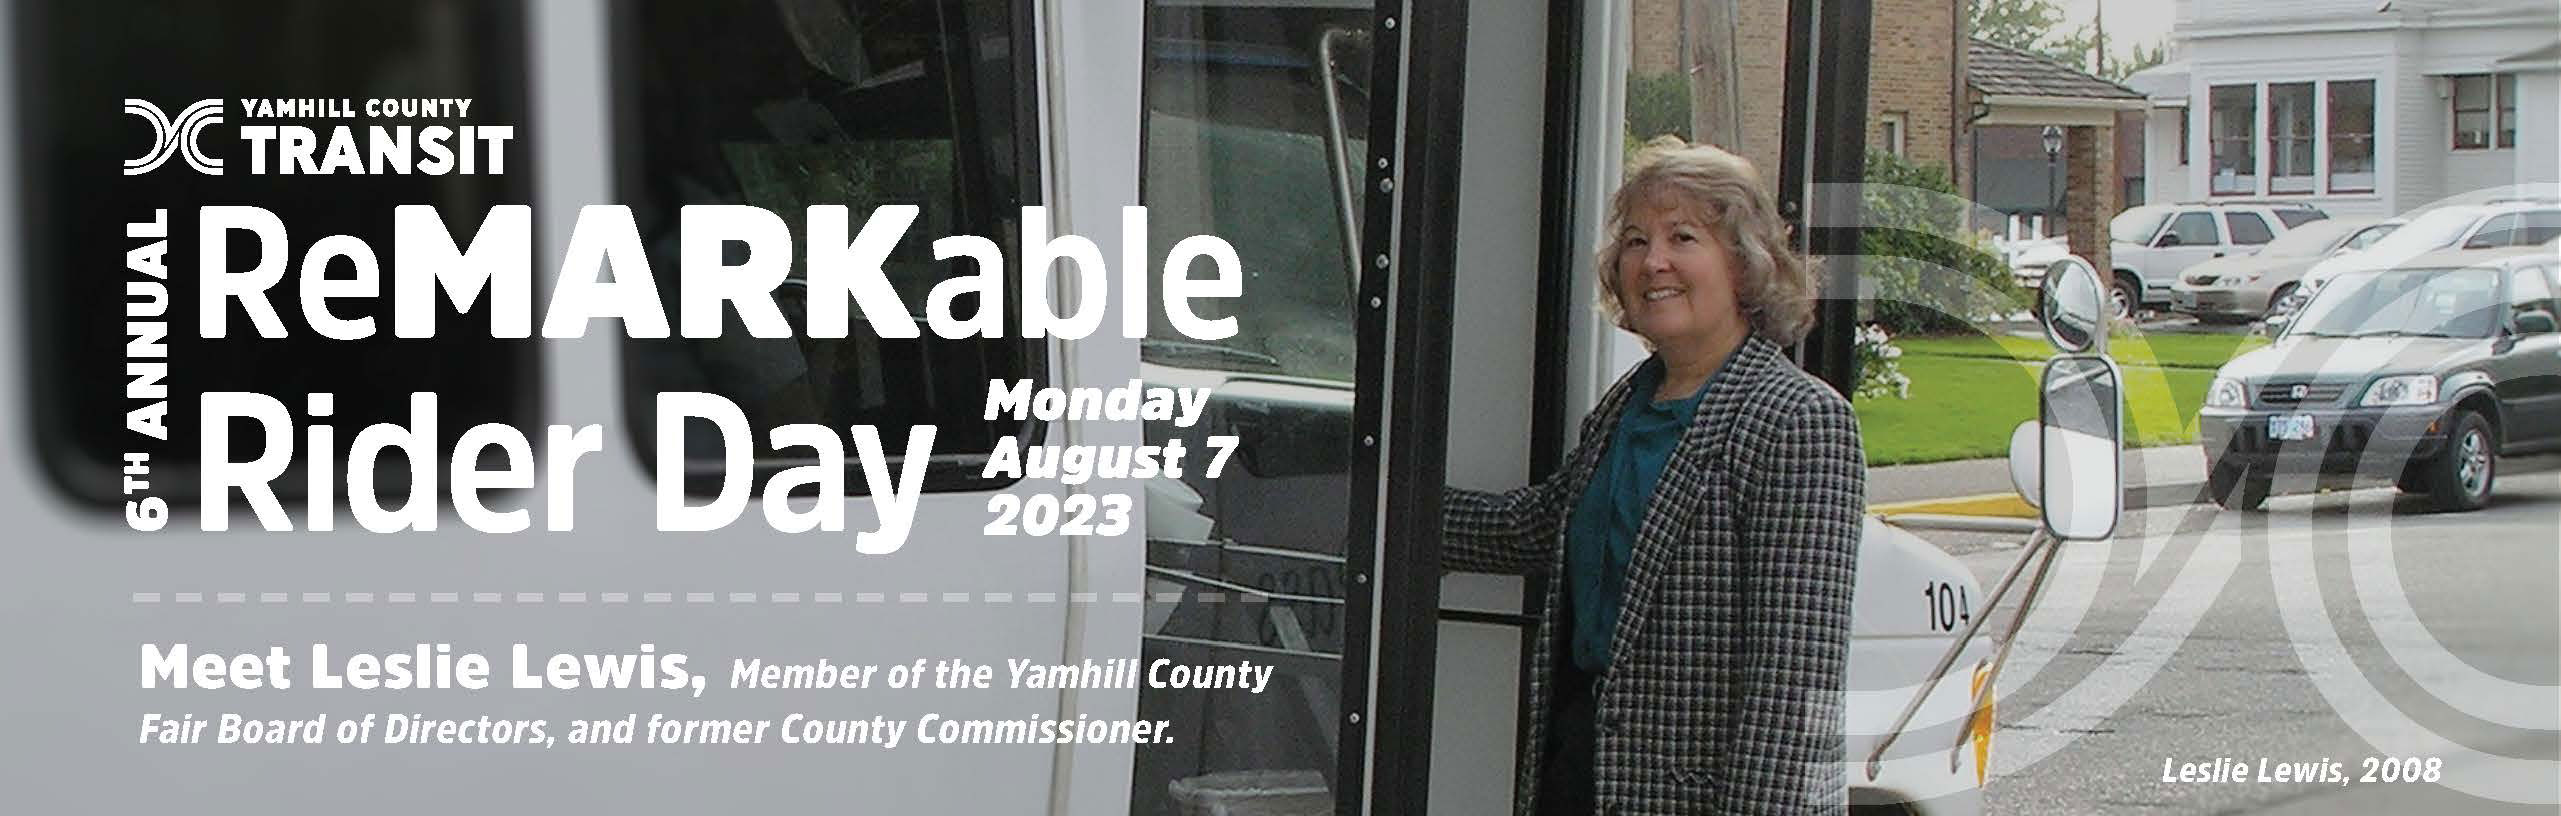 ReMARKable Rider Day! Meet Leslie Lewis, Member of the Yamhill County Fair Board of Directors, and former County Commissioner.